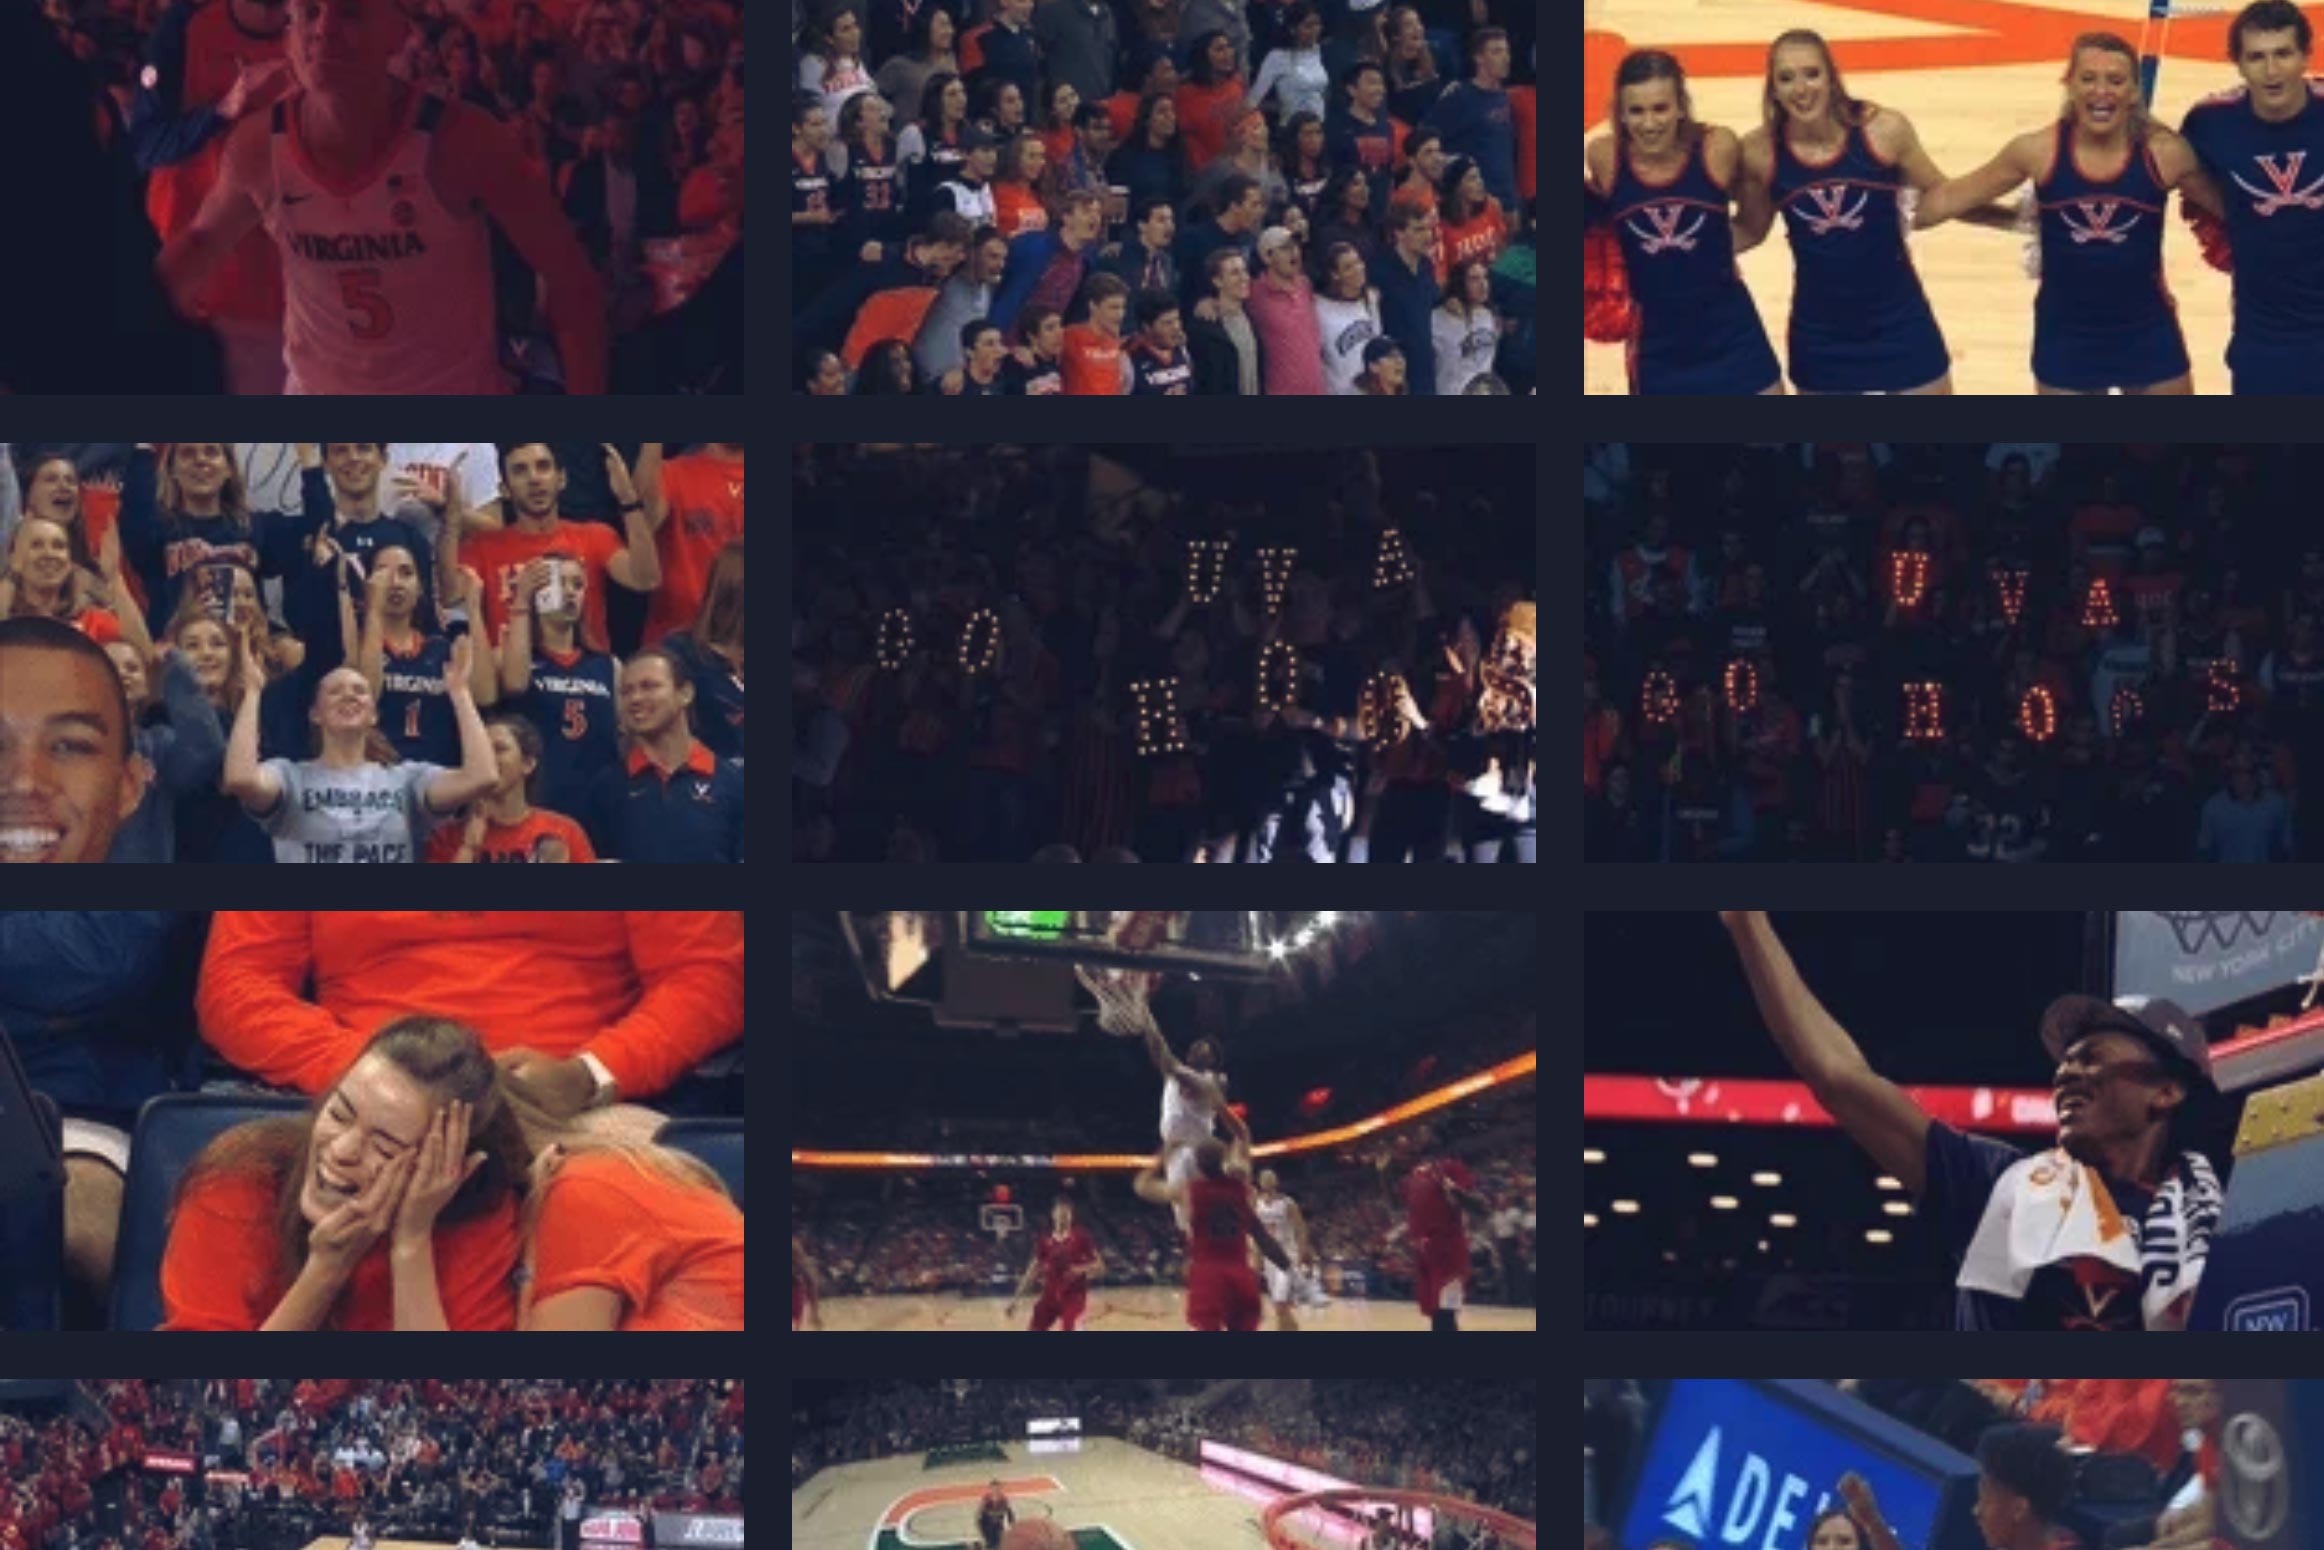 Collage of winning moments at UVA